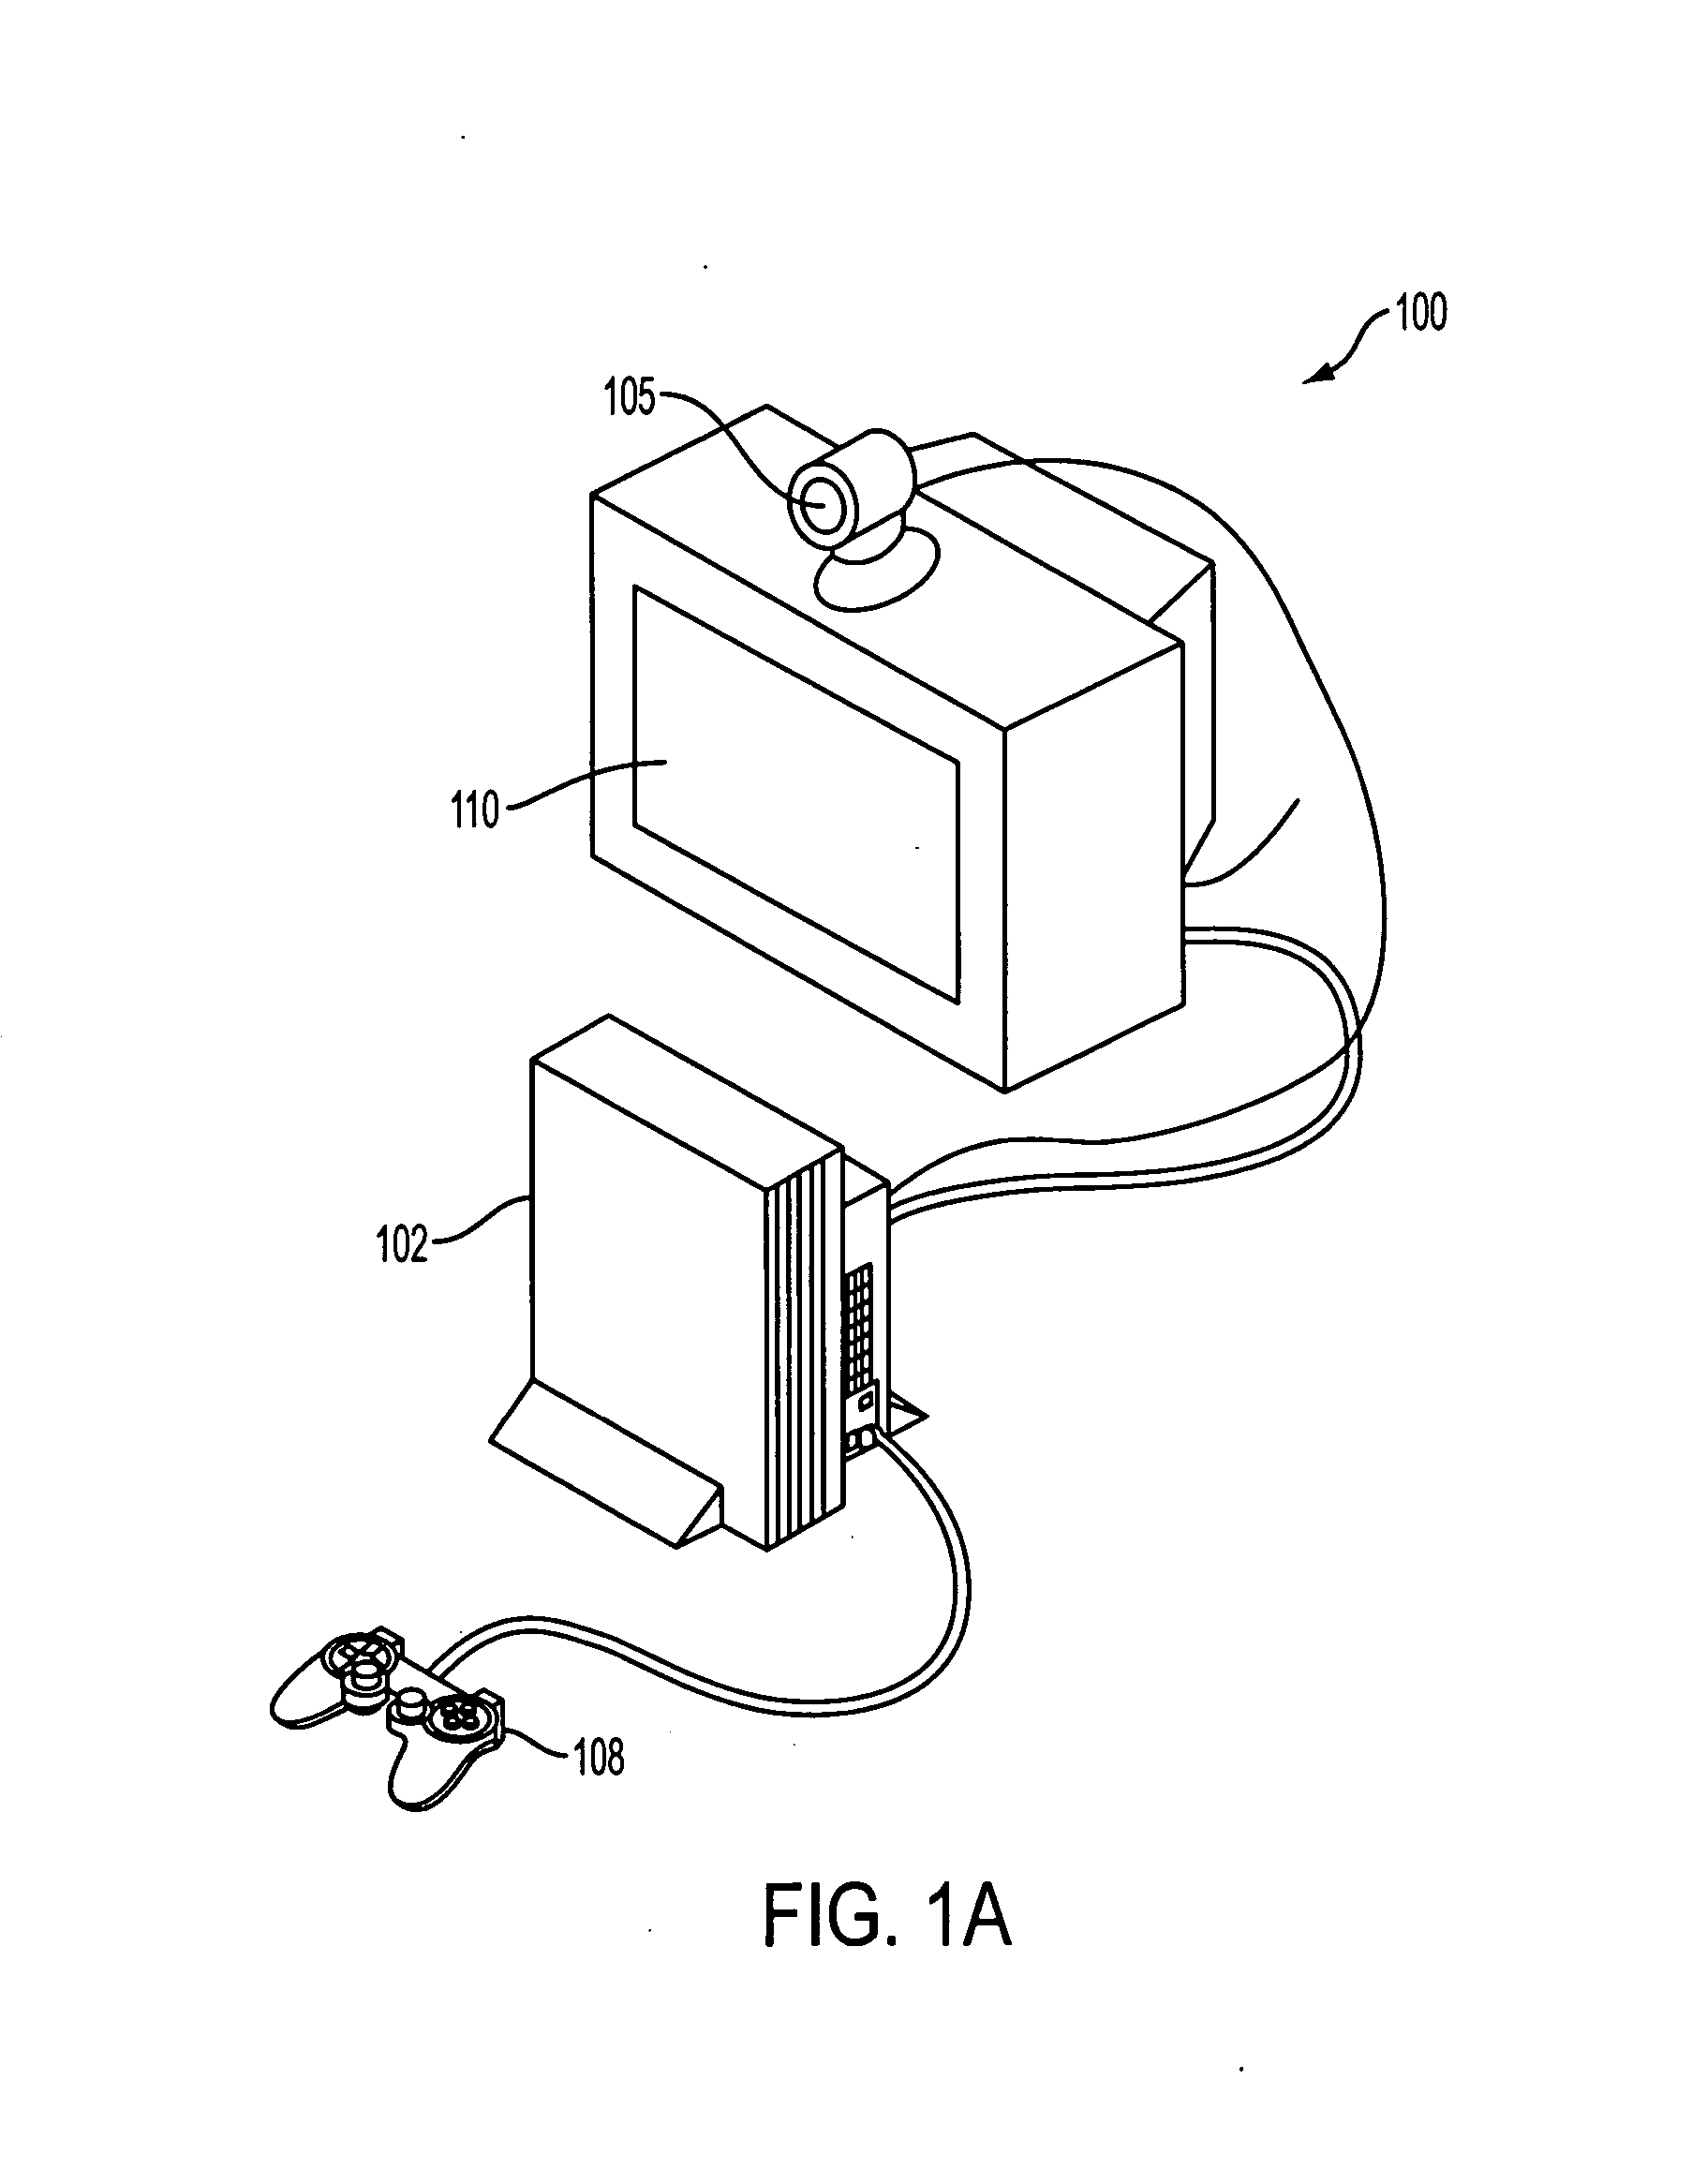 Methods and systems for enabling direction detection when interfacing with a computer program